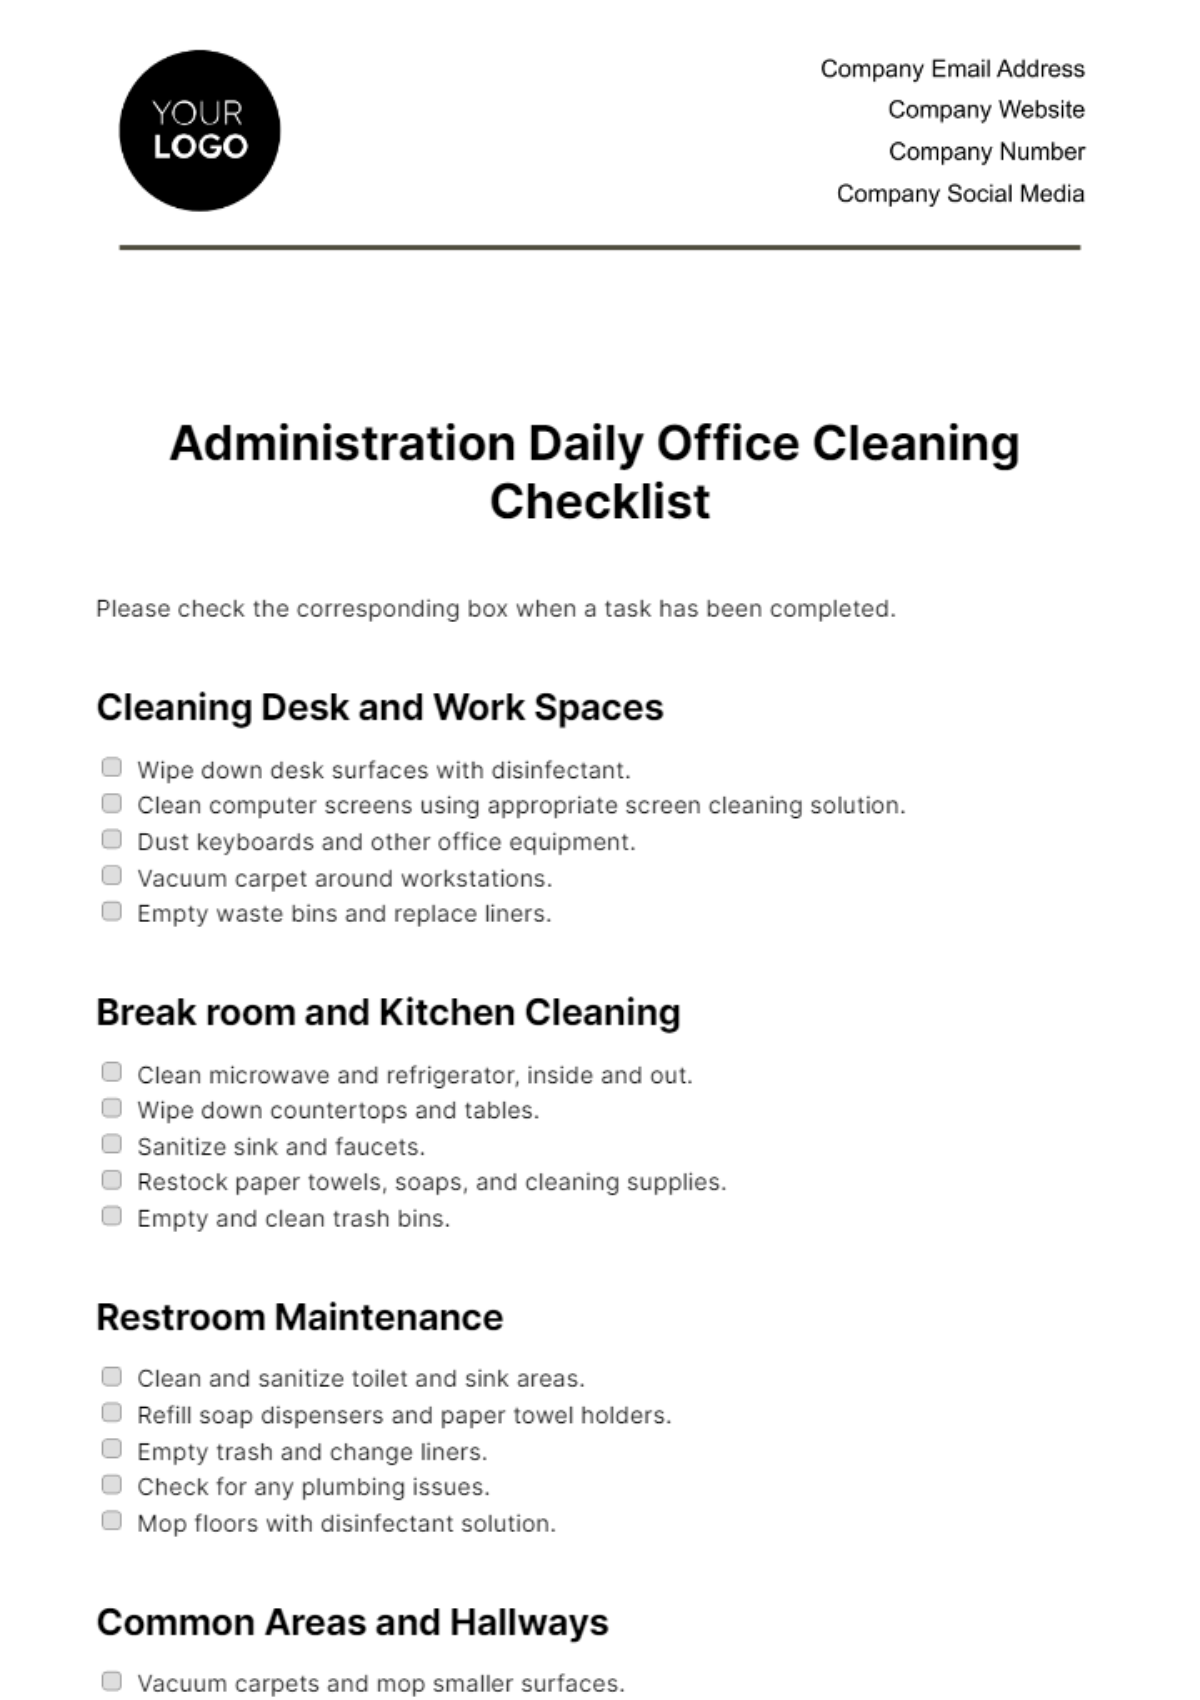 Free Administration Daily Office Cleaning Checklist Template